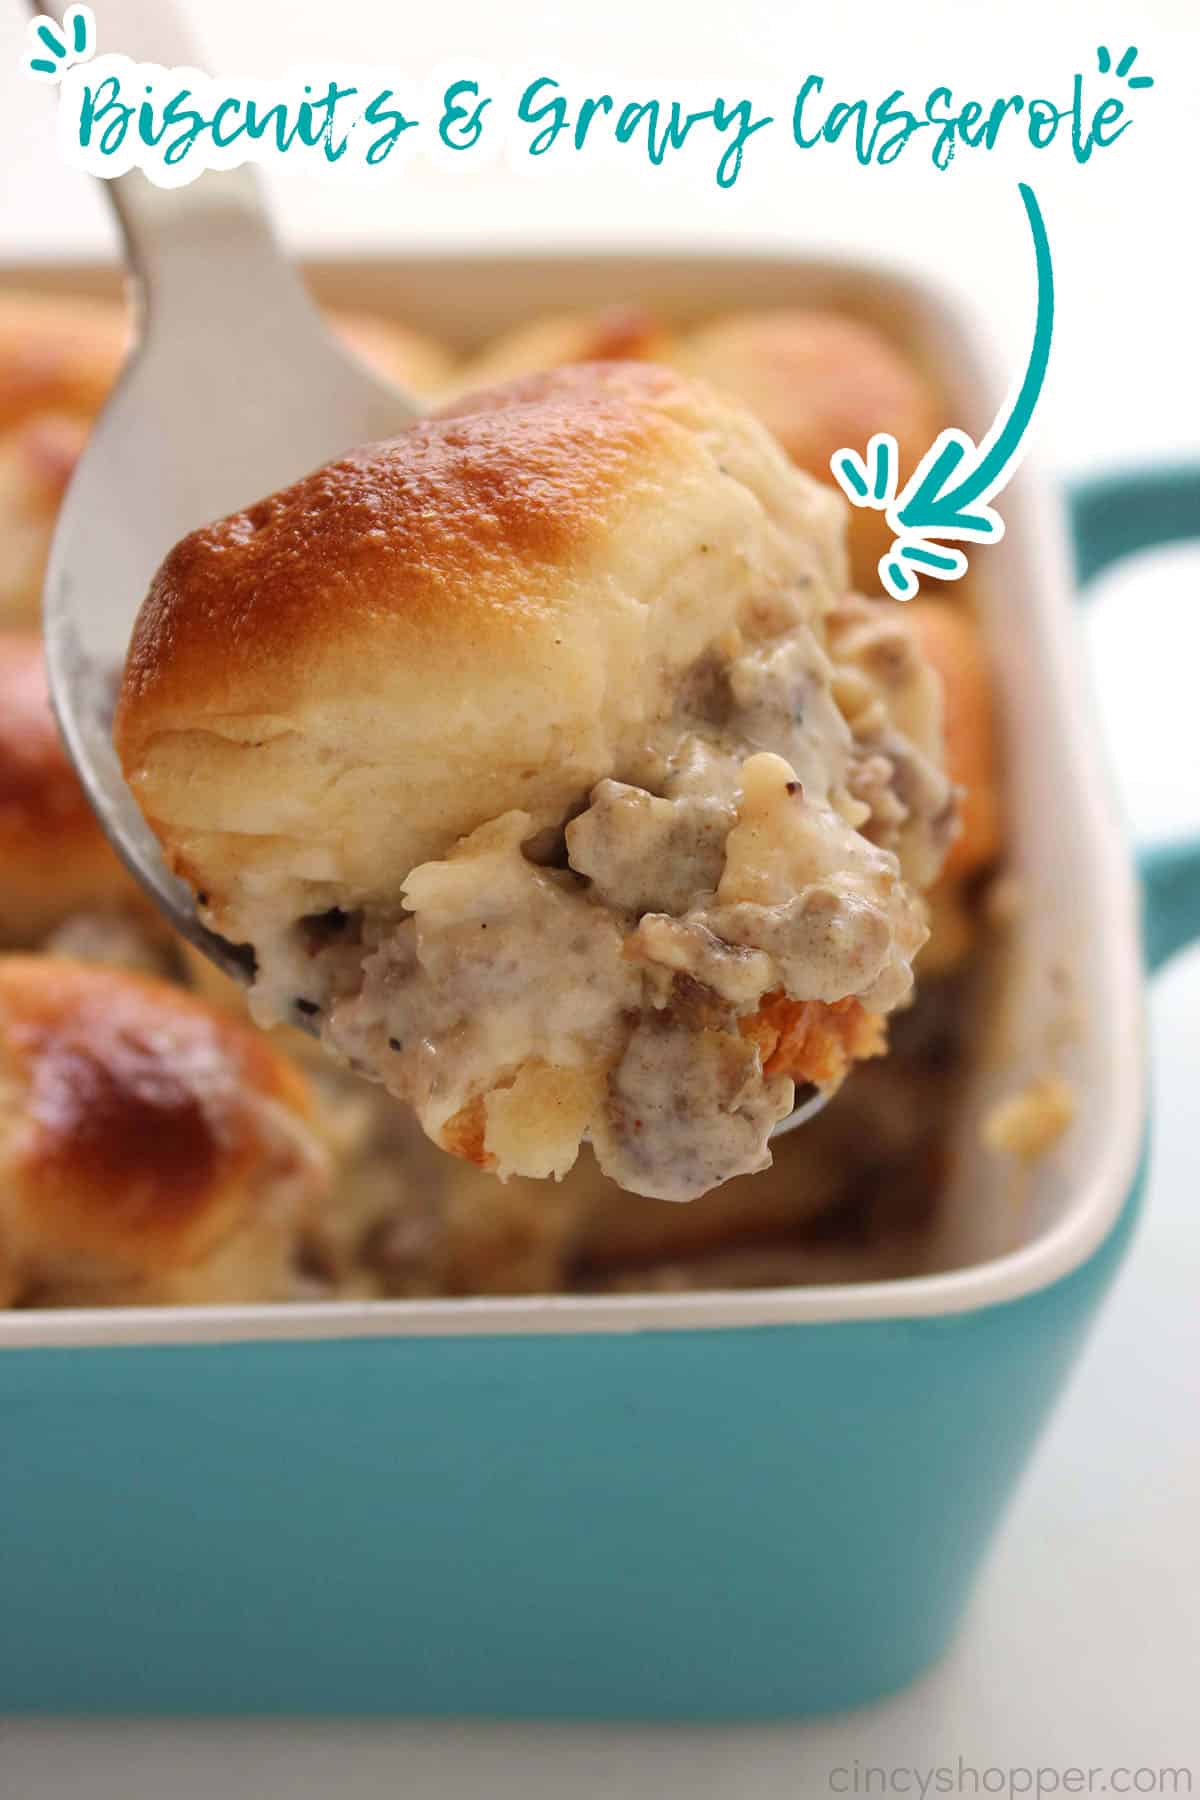 Text on image Biscuits and Gravy Casserole